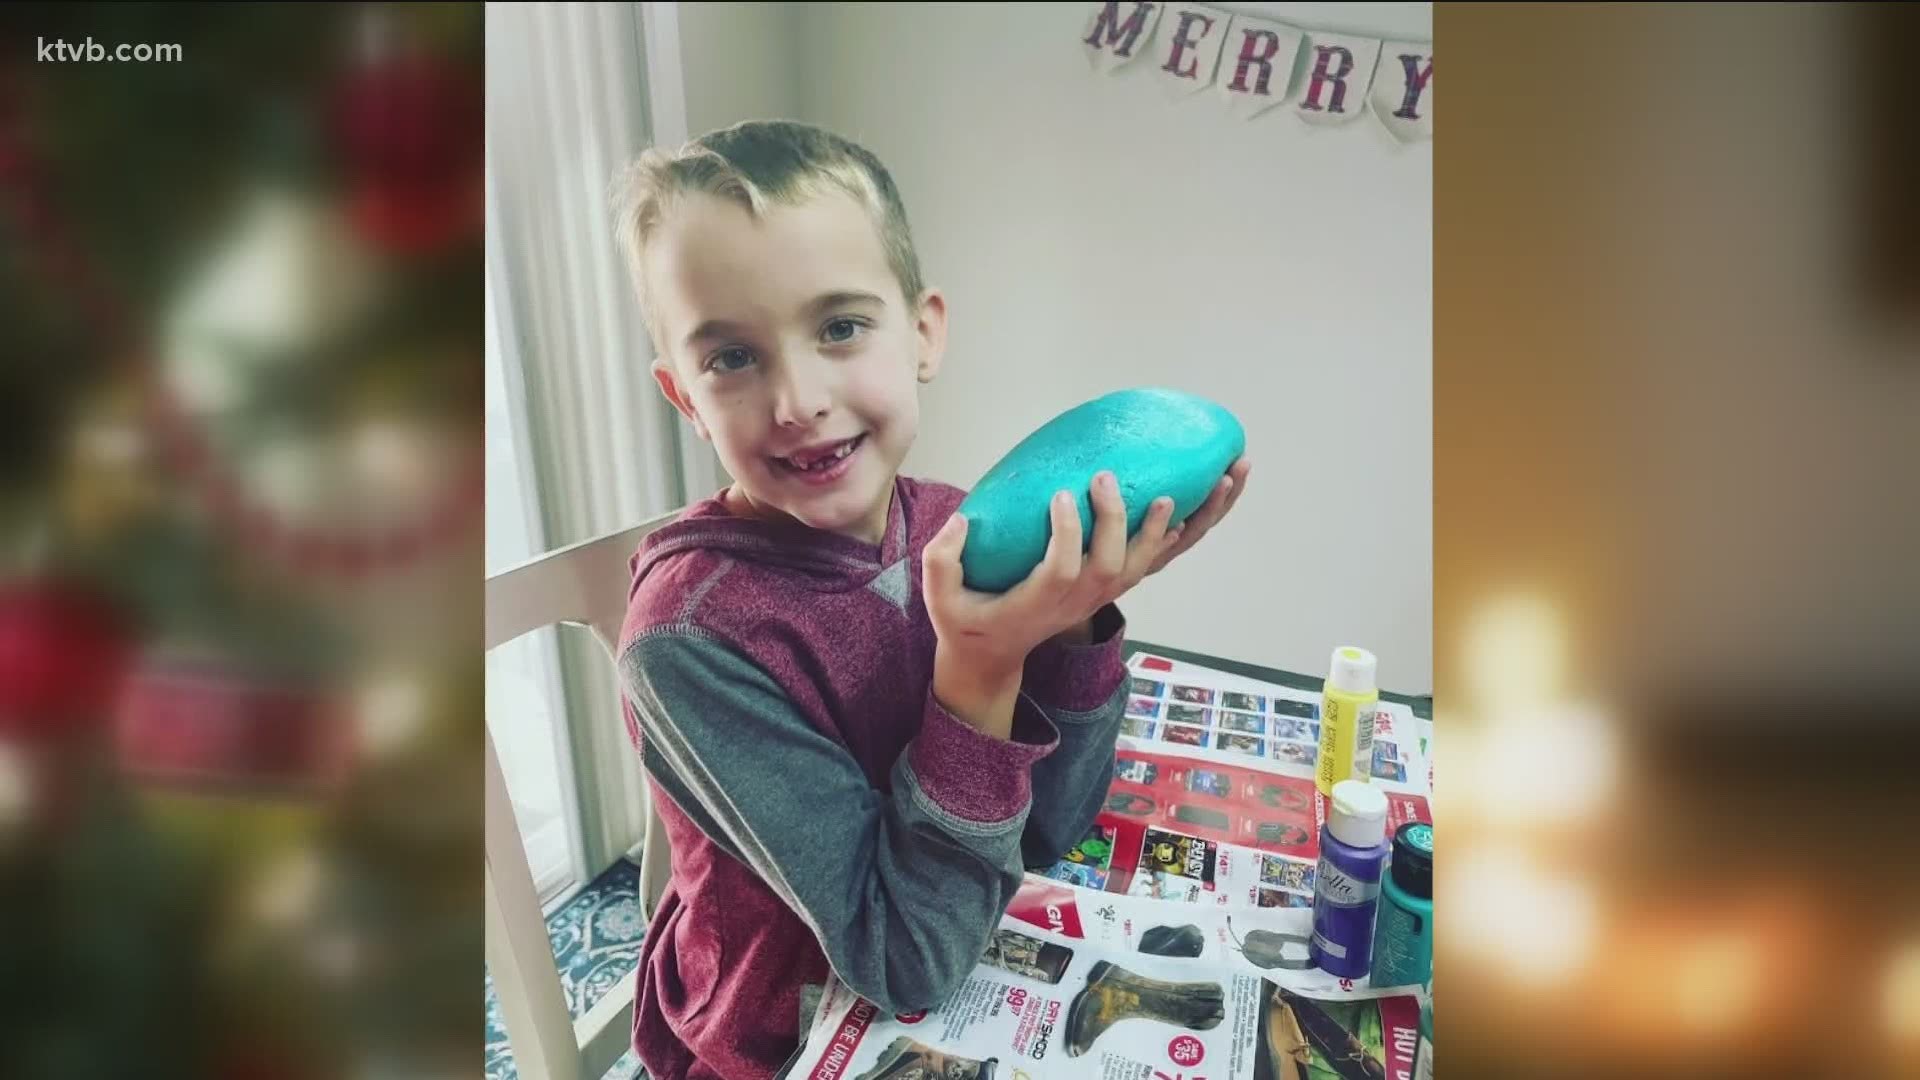 Sky French and his mom were blown away when the community stepped up to buy his rocks and make his dream come true: to help those in need.